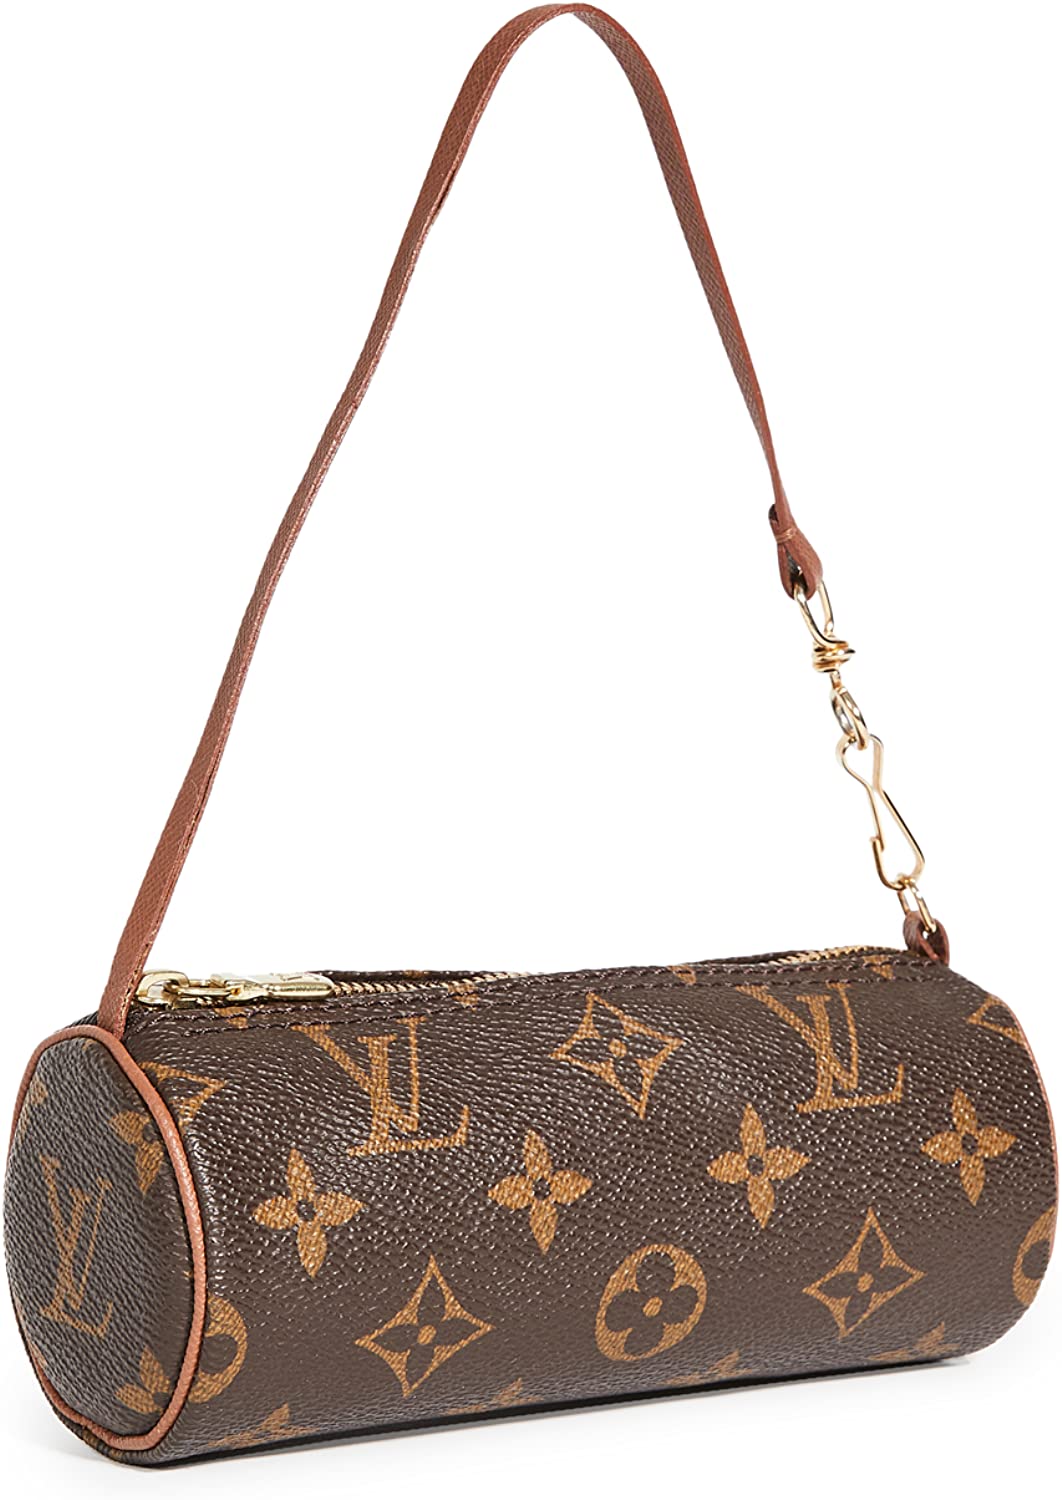 New year offer lv 3 in 1 bag at wholesale price #foryoupage #fypシ゚vira